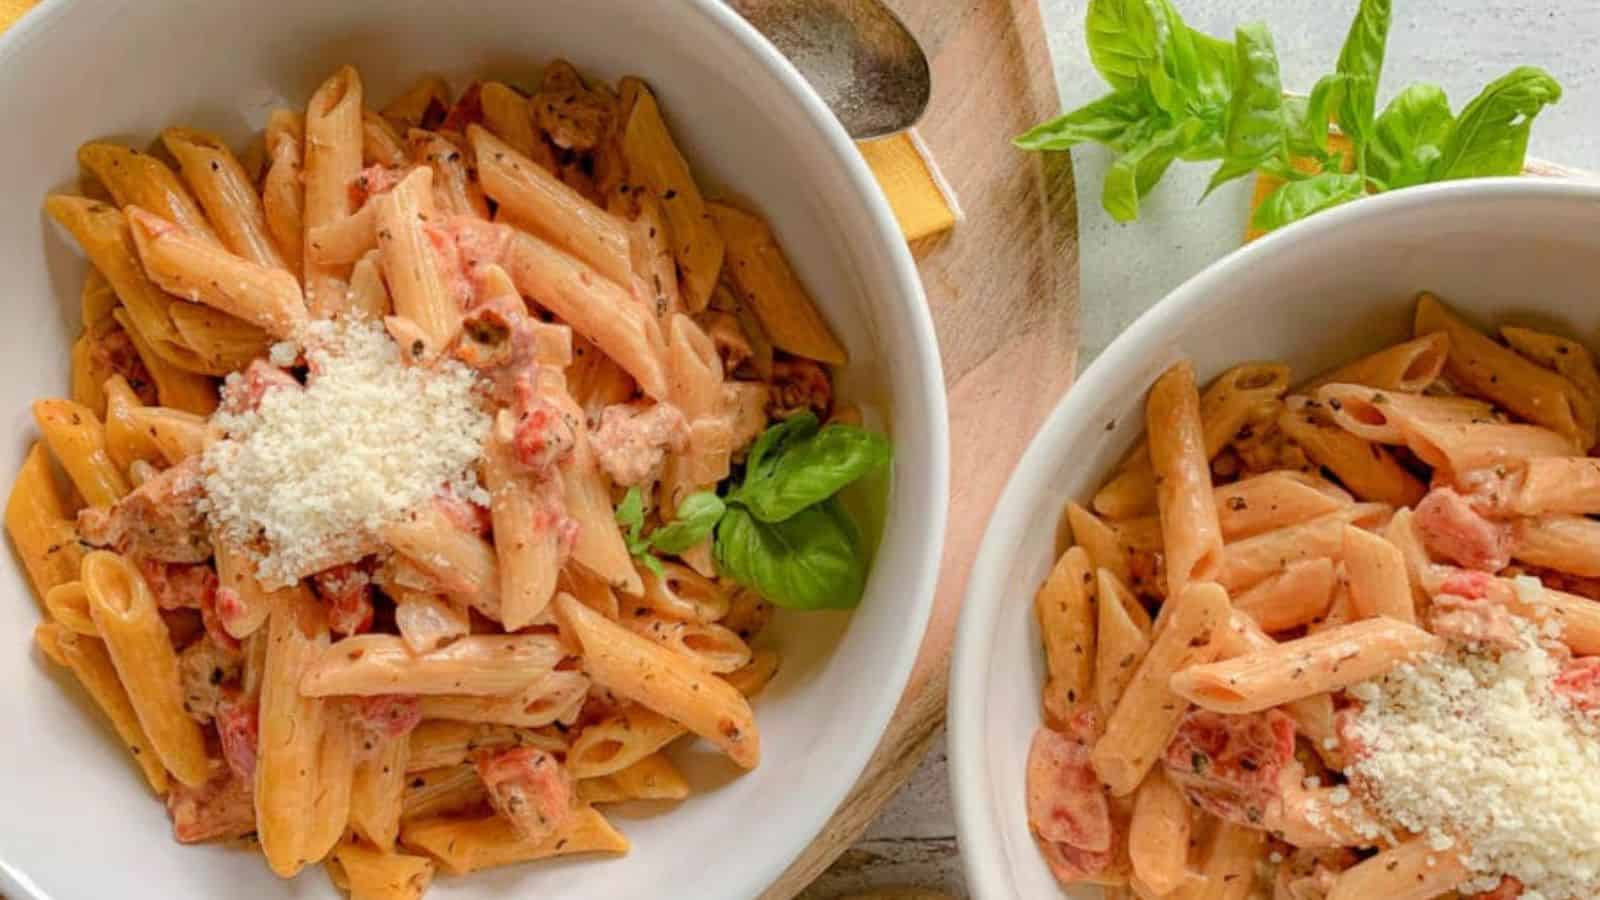 Two pasta bowls filled with penne and chunks of sausage and tomatoes.